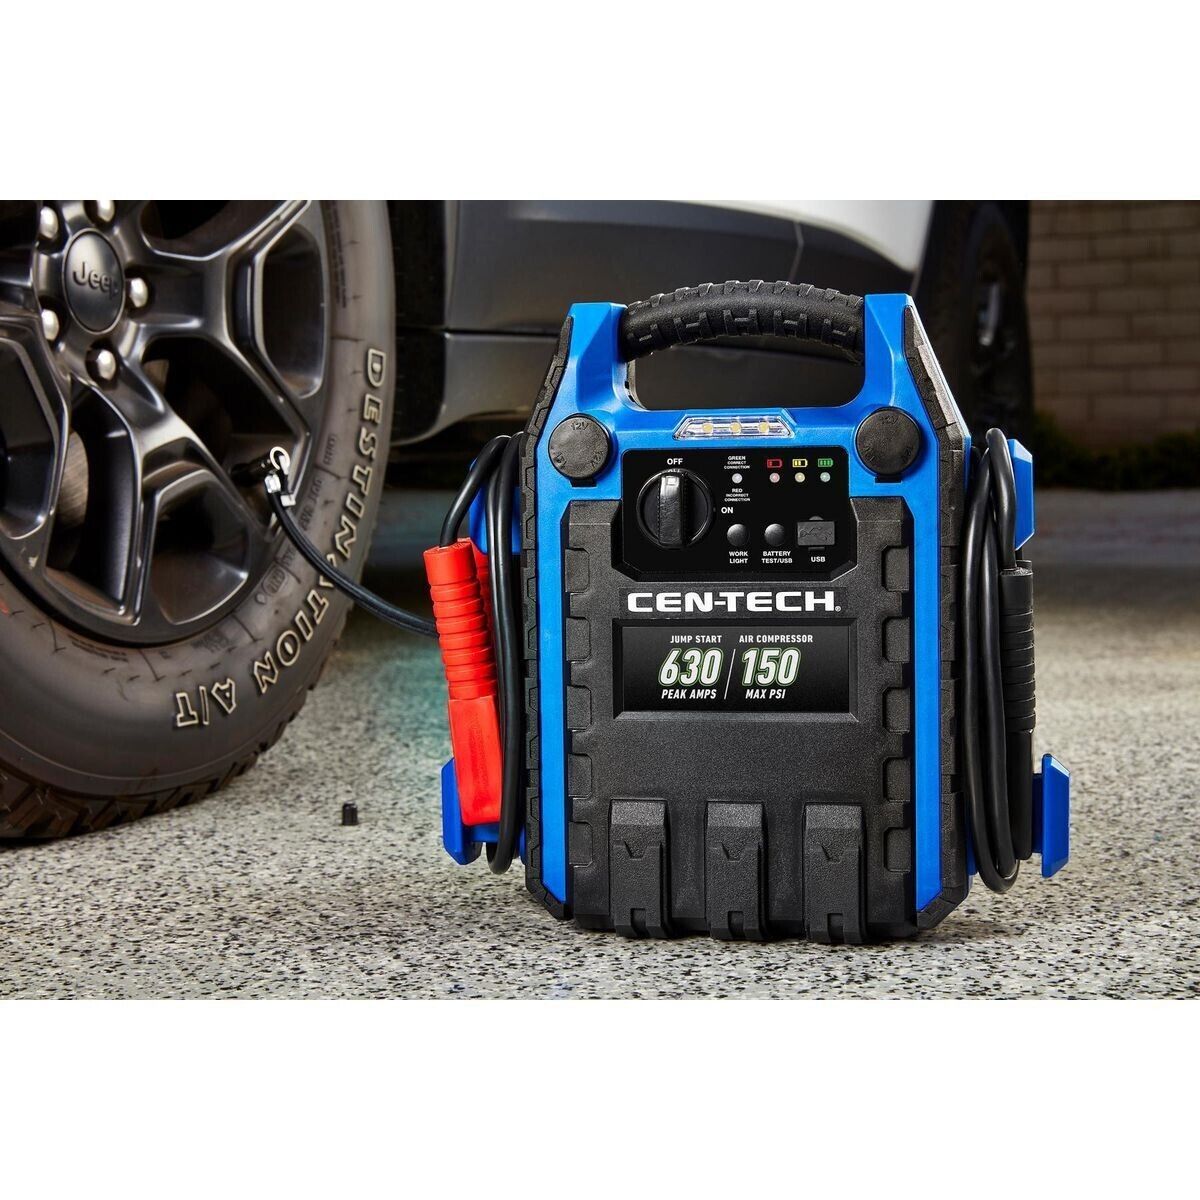 The complete CEN-TECH Portable Jump Starter and Power Pack set, highlighting its all-in-one emergency readiness.